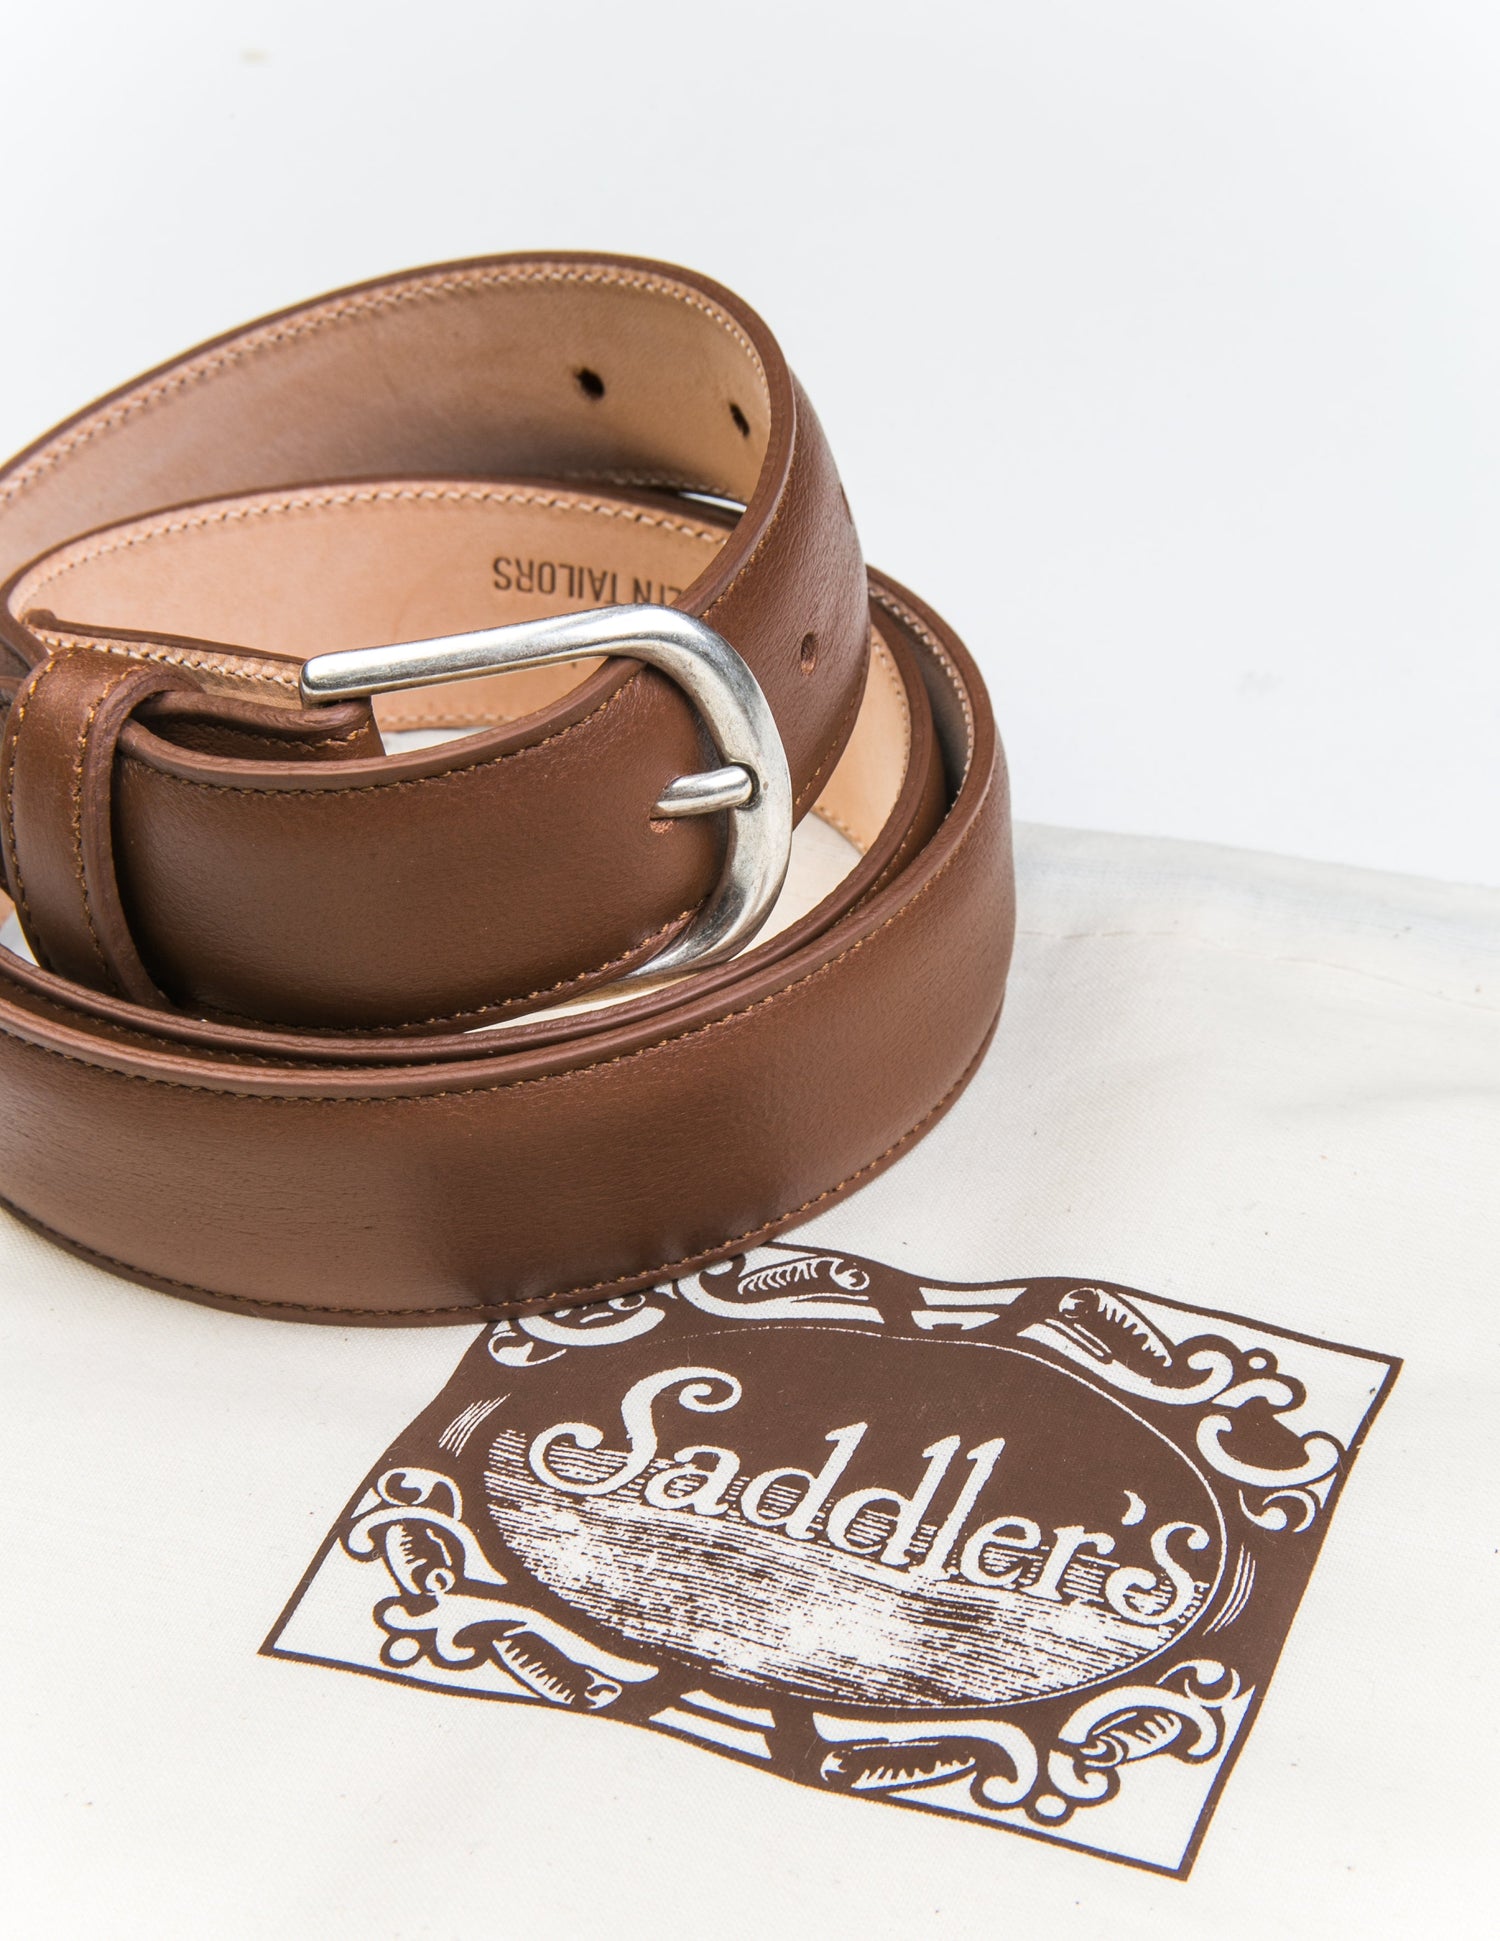 Brooklyn Tailors x Saddler's 30mm Belt in Smooth Leather - Honey Brown coiled next to the fabric dust bag it's sold with. 